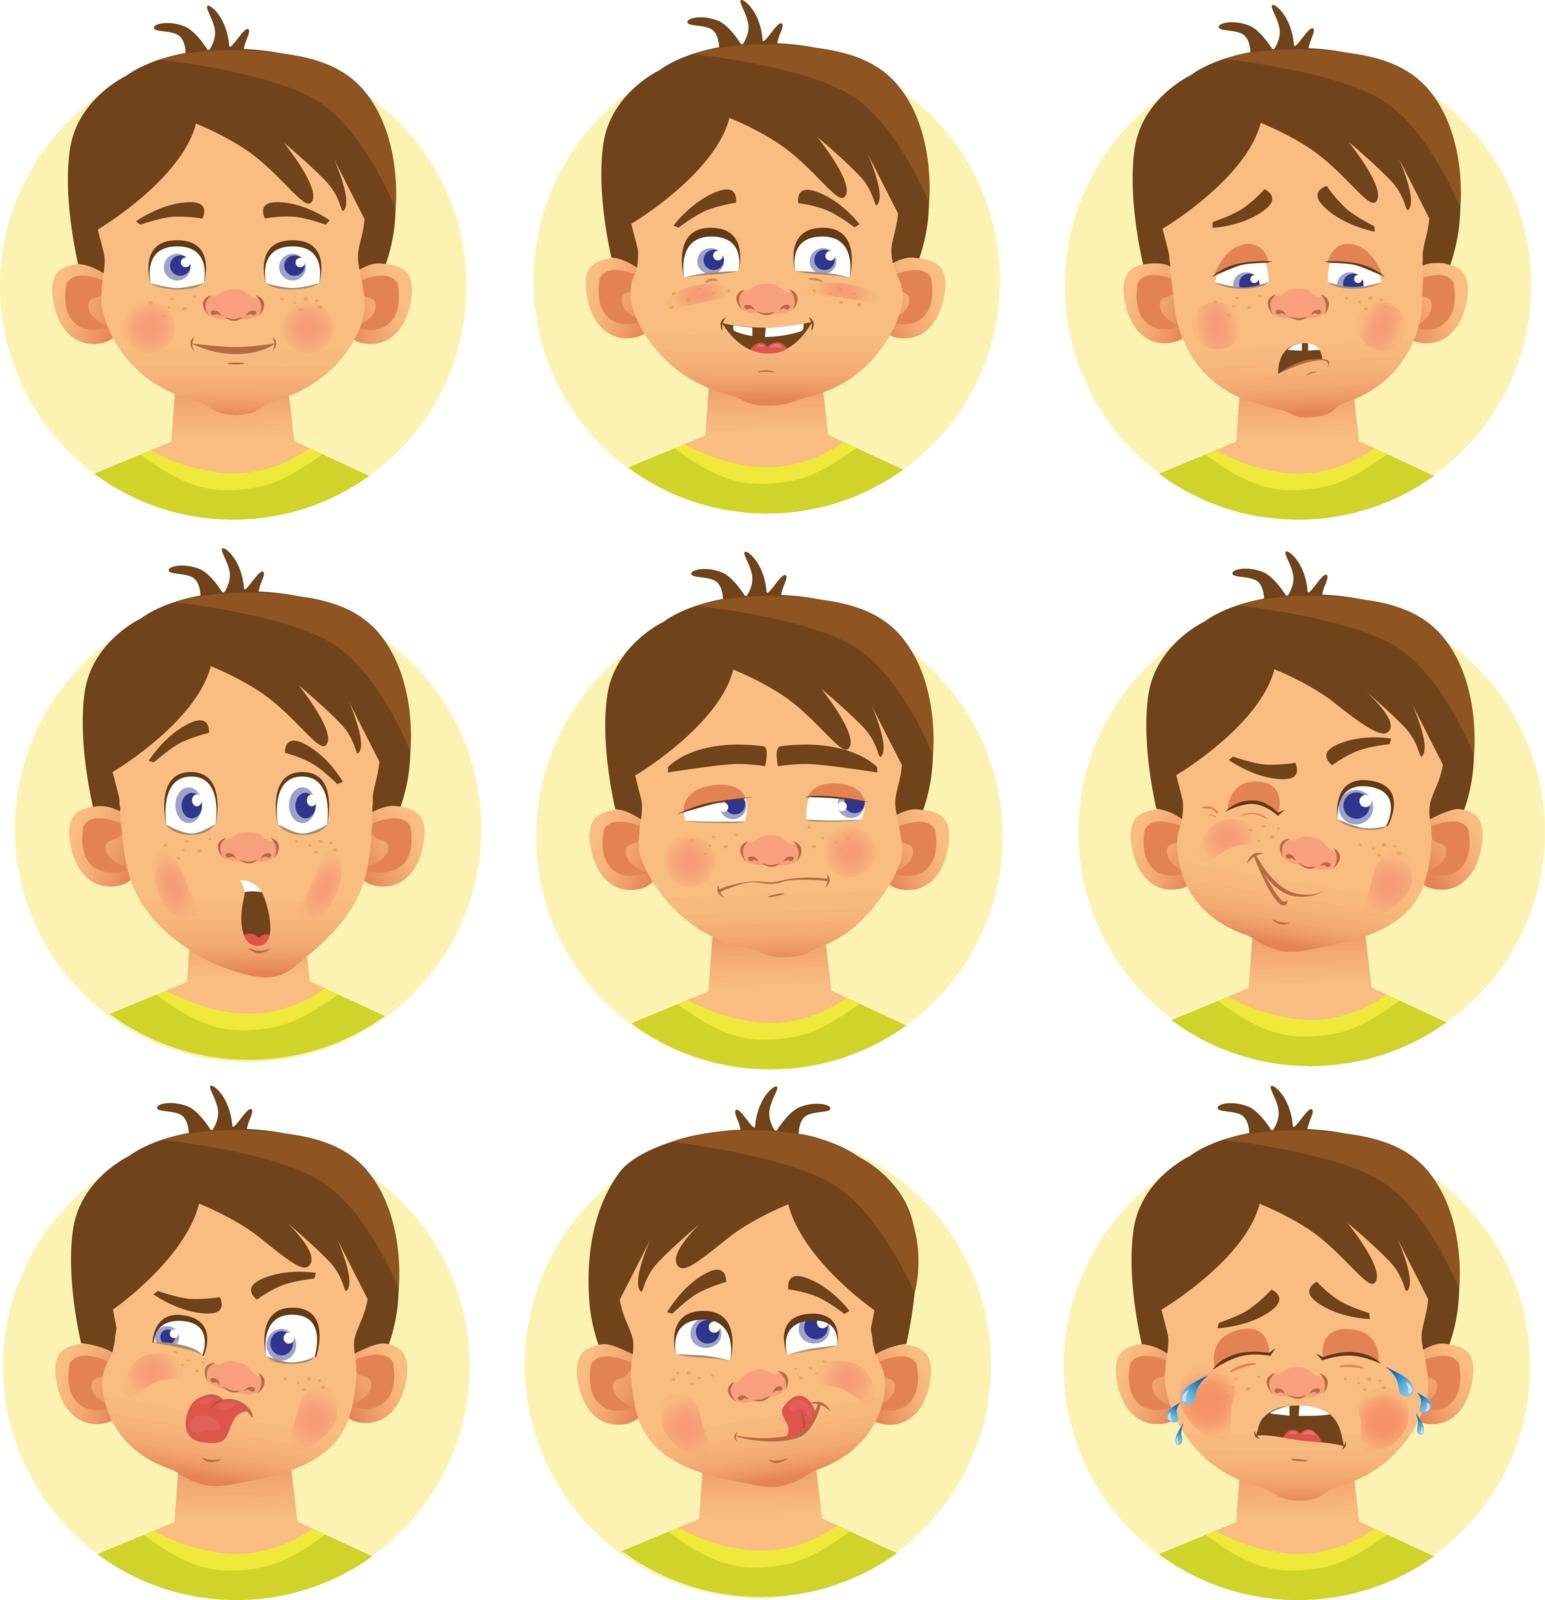 Set of different characters of children. Set of emoticons. Flat vector illustration.